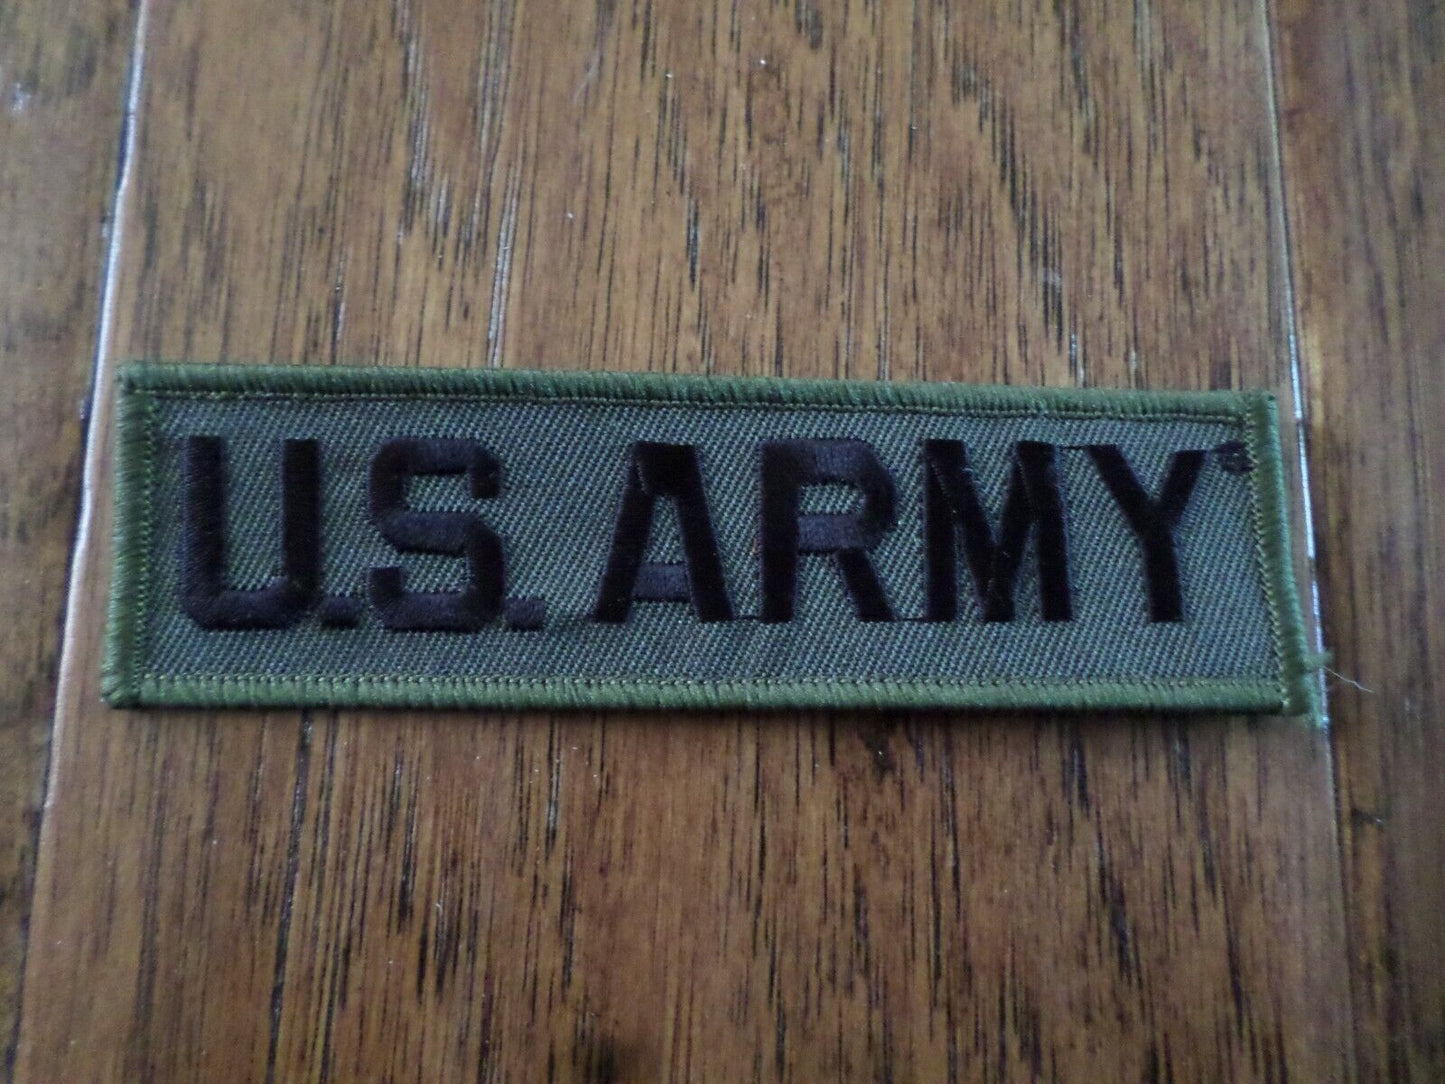 U.S Army Uniform Tape Patch Name Tag Chest Breast Tab Embroidered Insignia